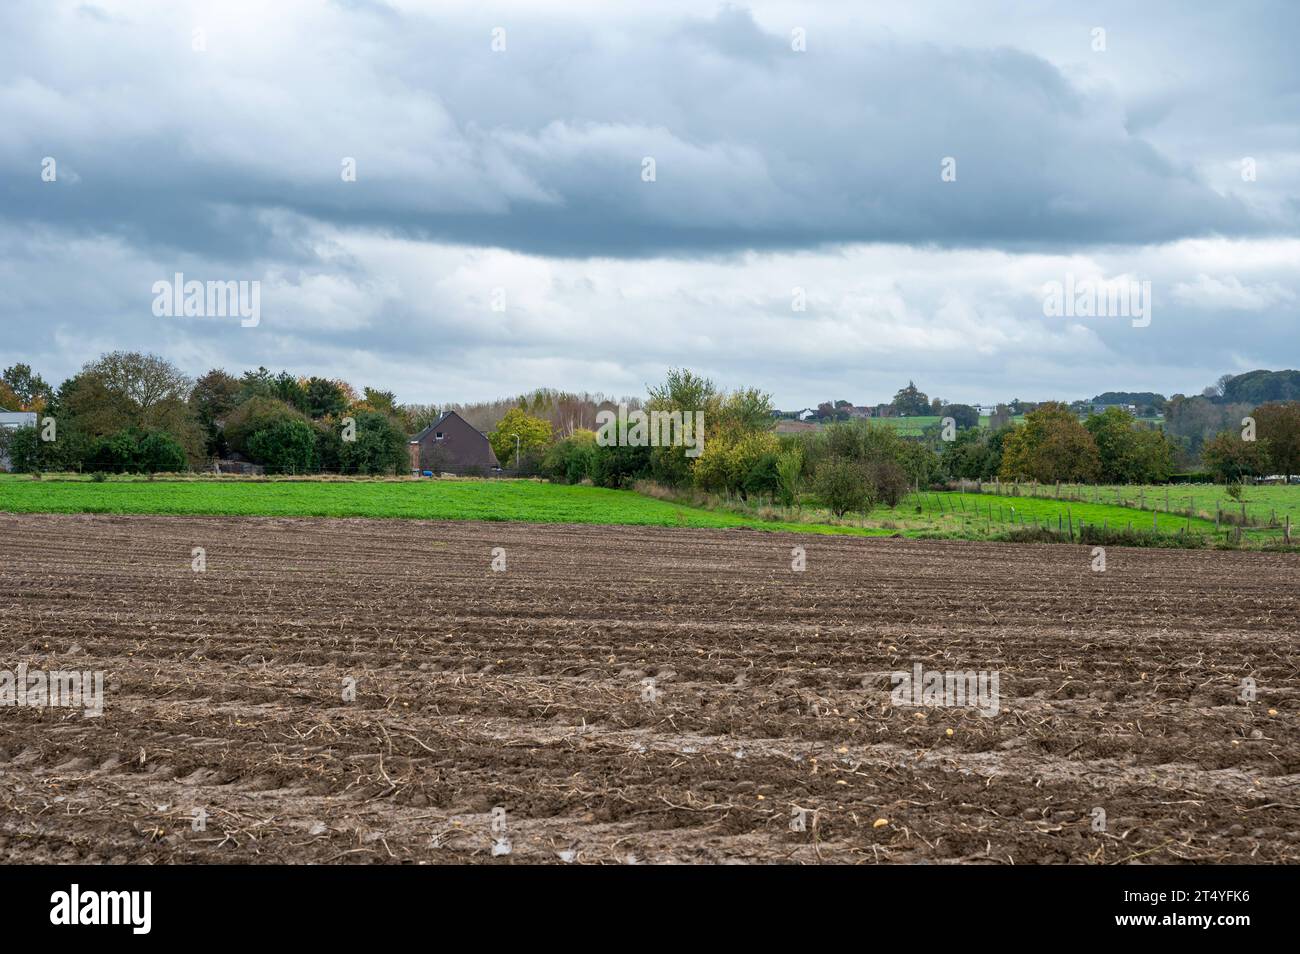 Landscape view over harvested agriculture fields of corn at the Flemish countryside around Roosdaal, Brabant, Belgium Credit: Imago/Alamy Live News Stock Photo